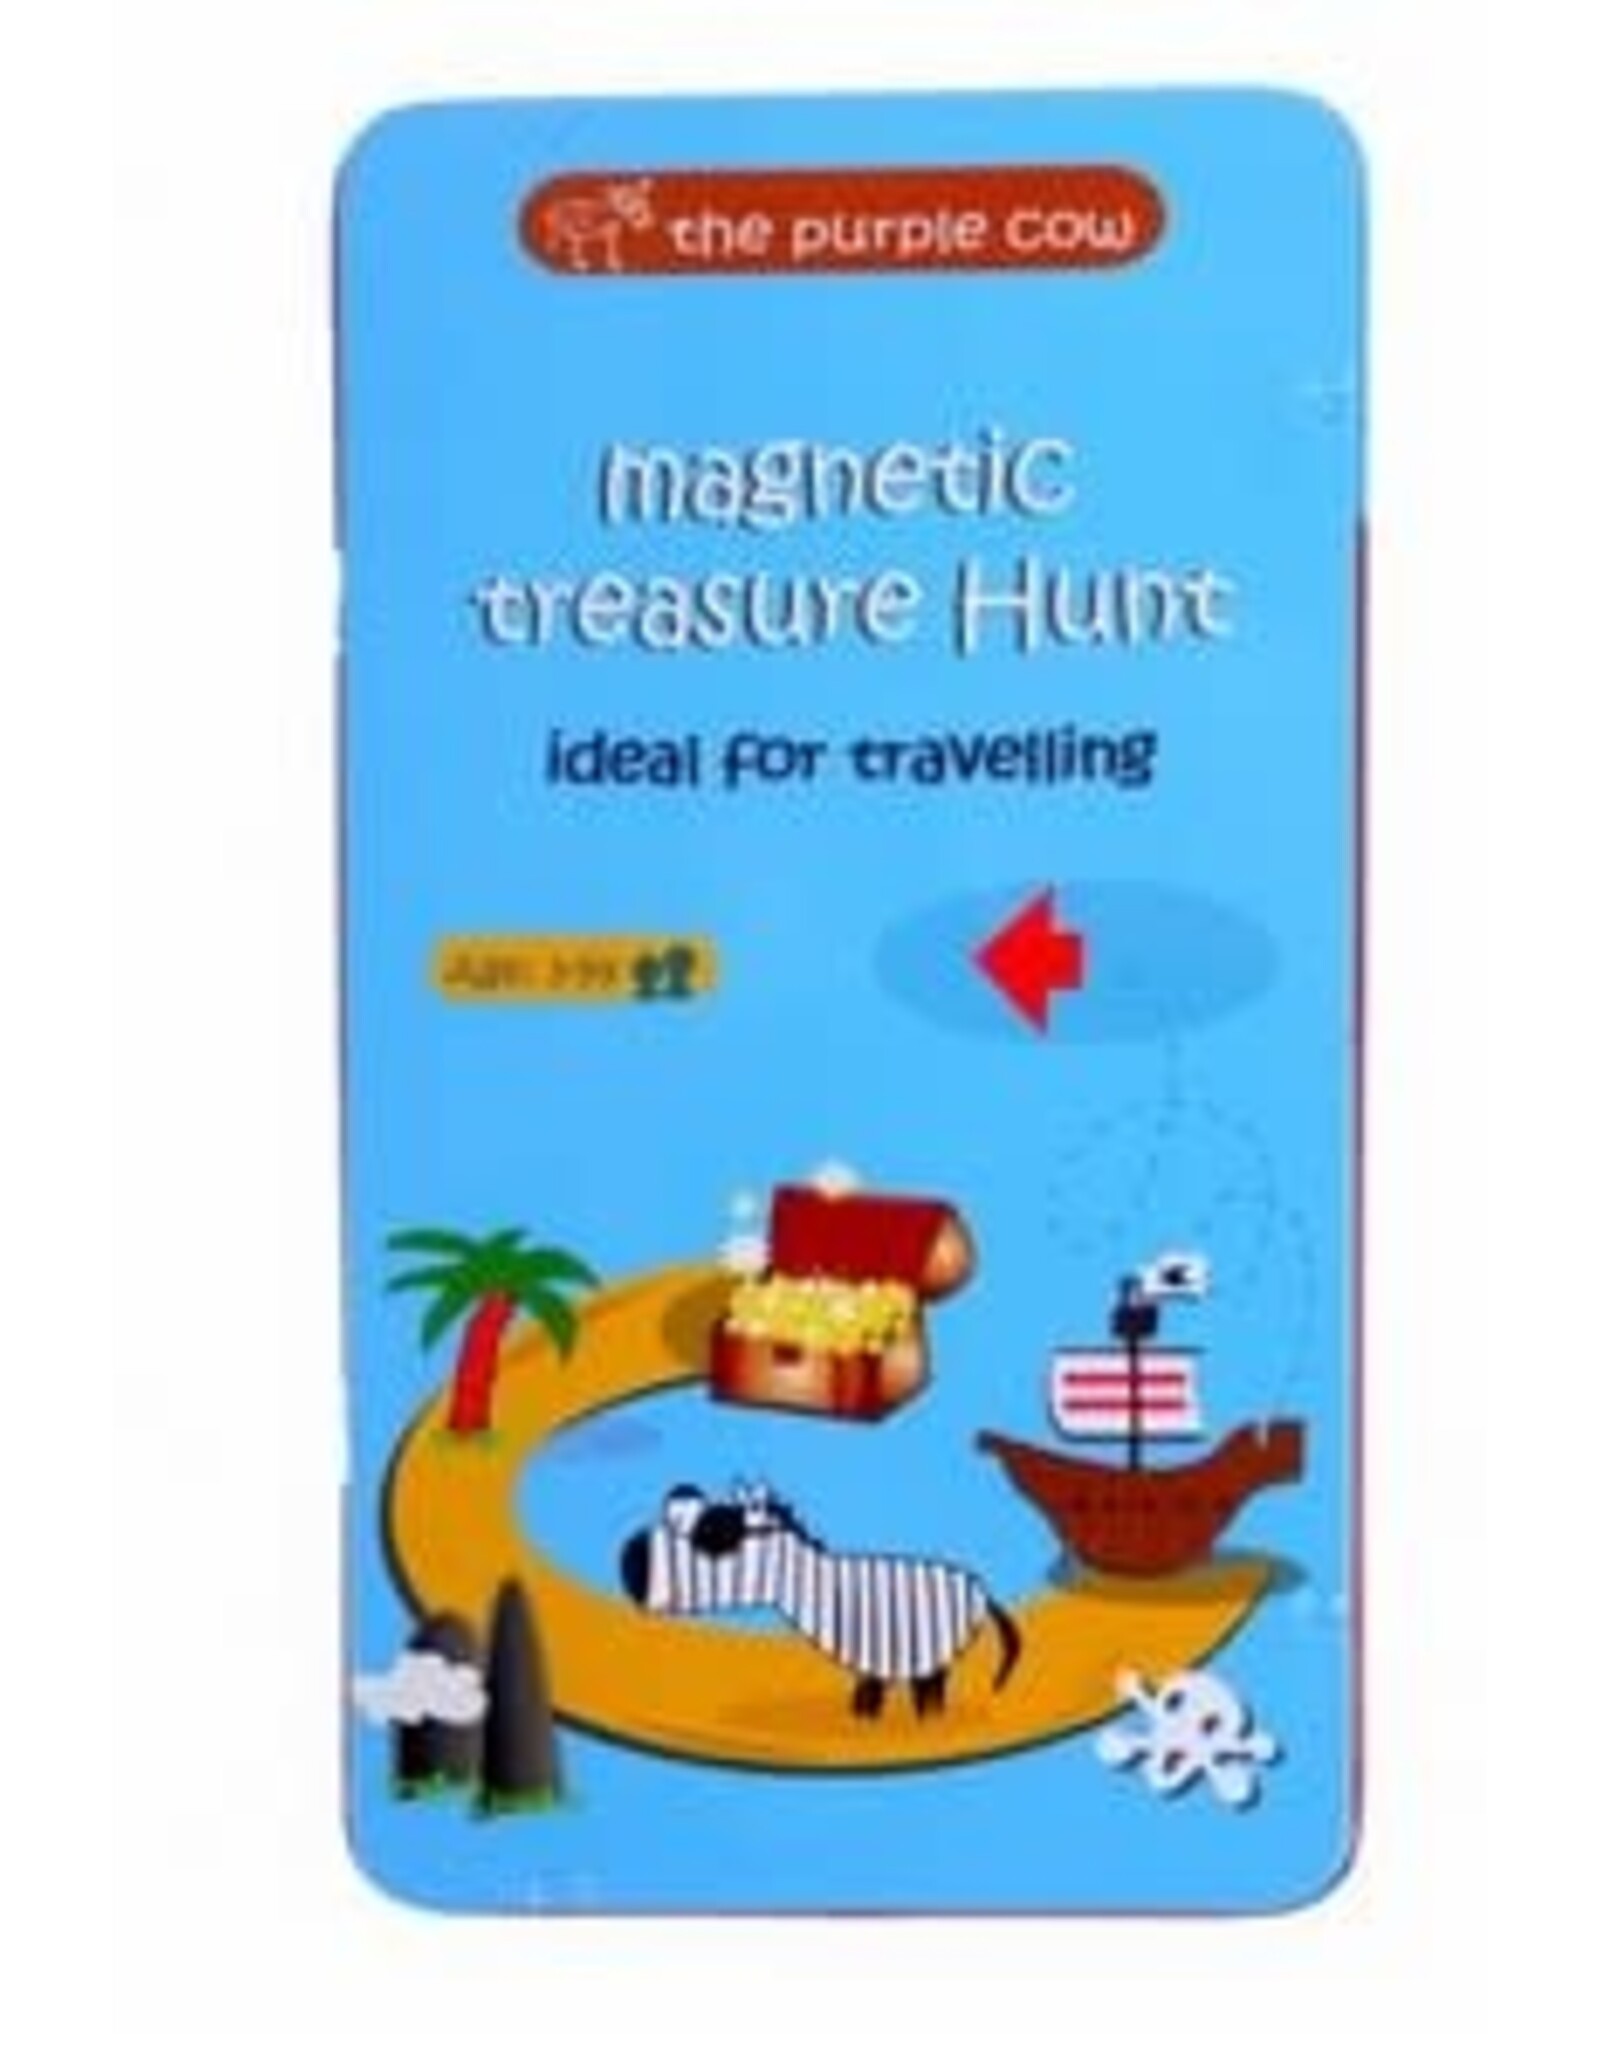 The Purple Cow Magnetic Treasure Hunt Travel Game